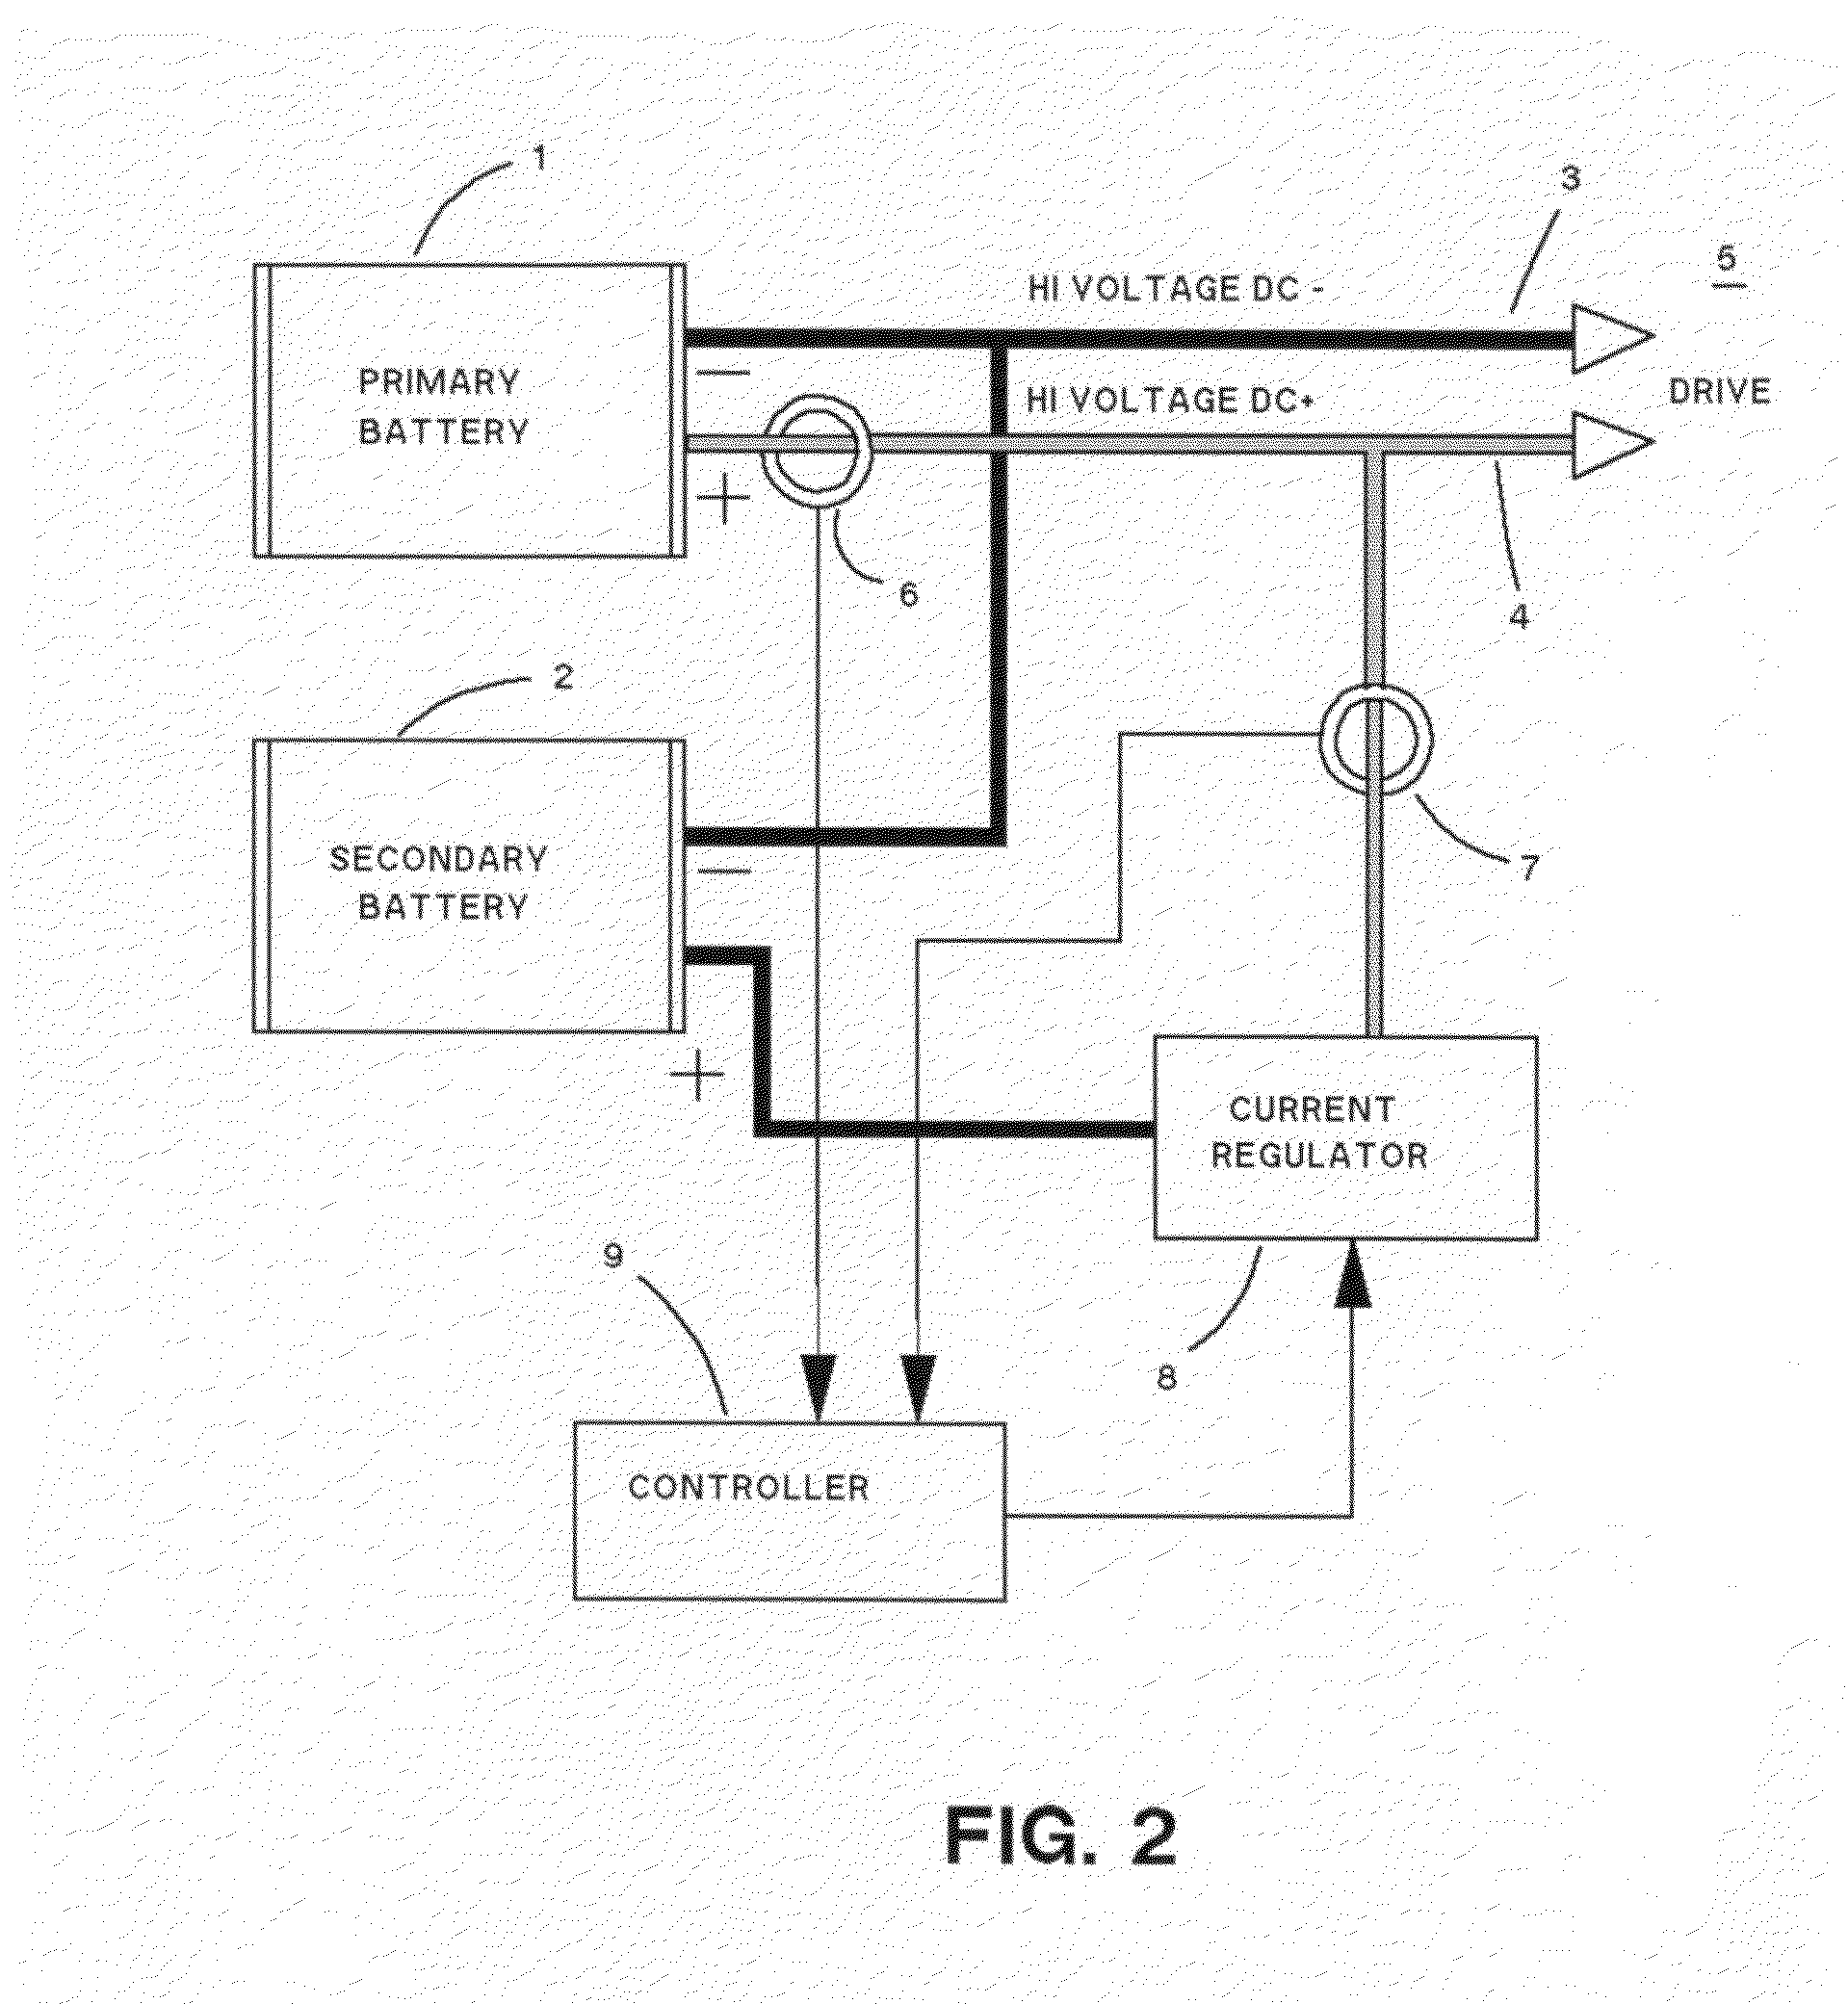 System and method for managing energy use in an electric vehicle